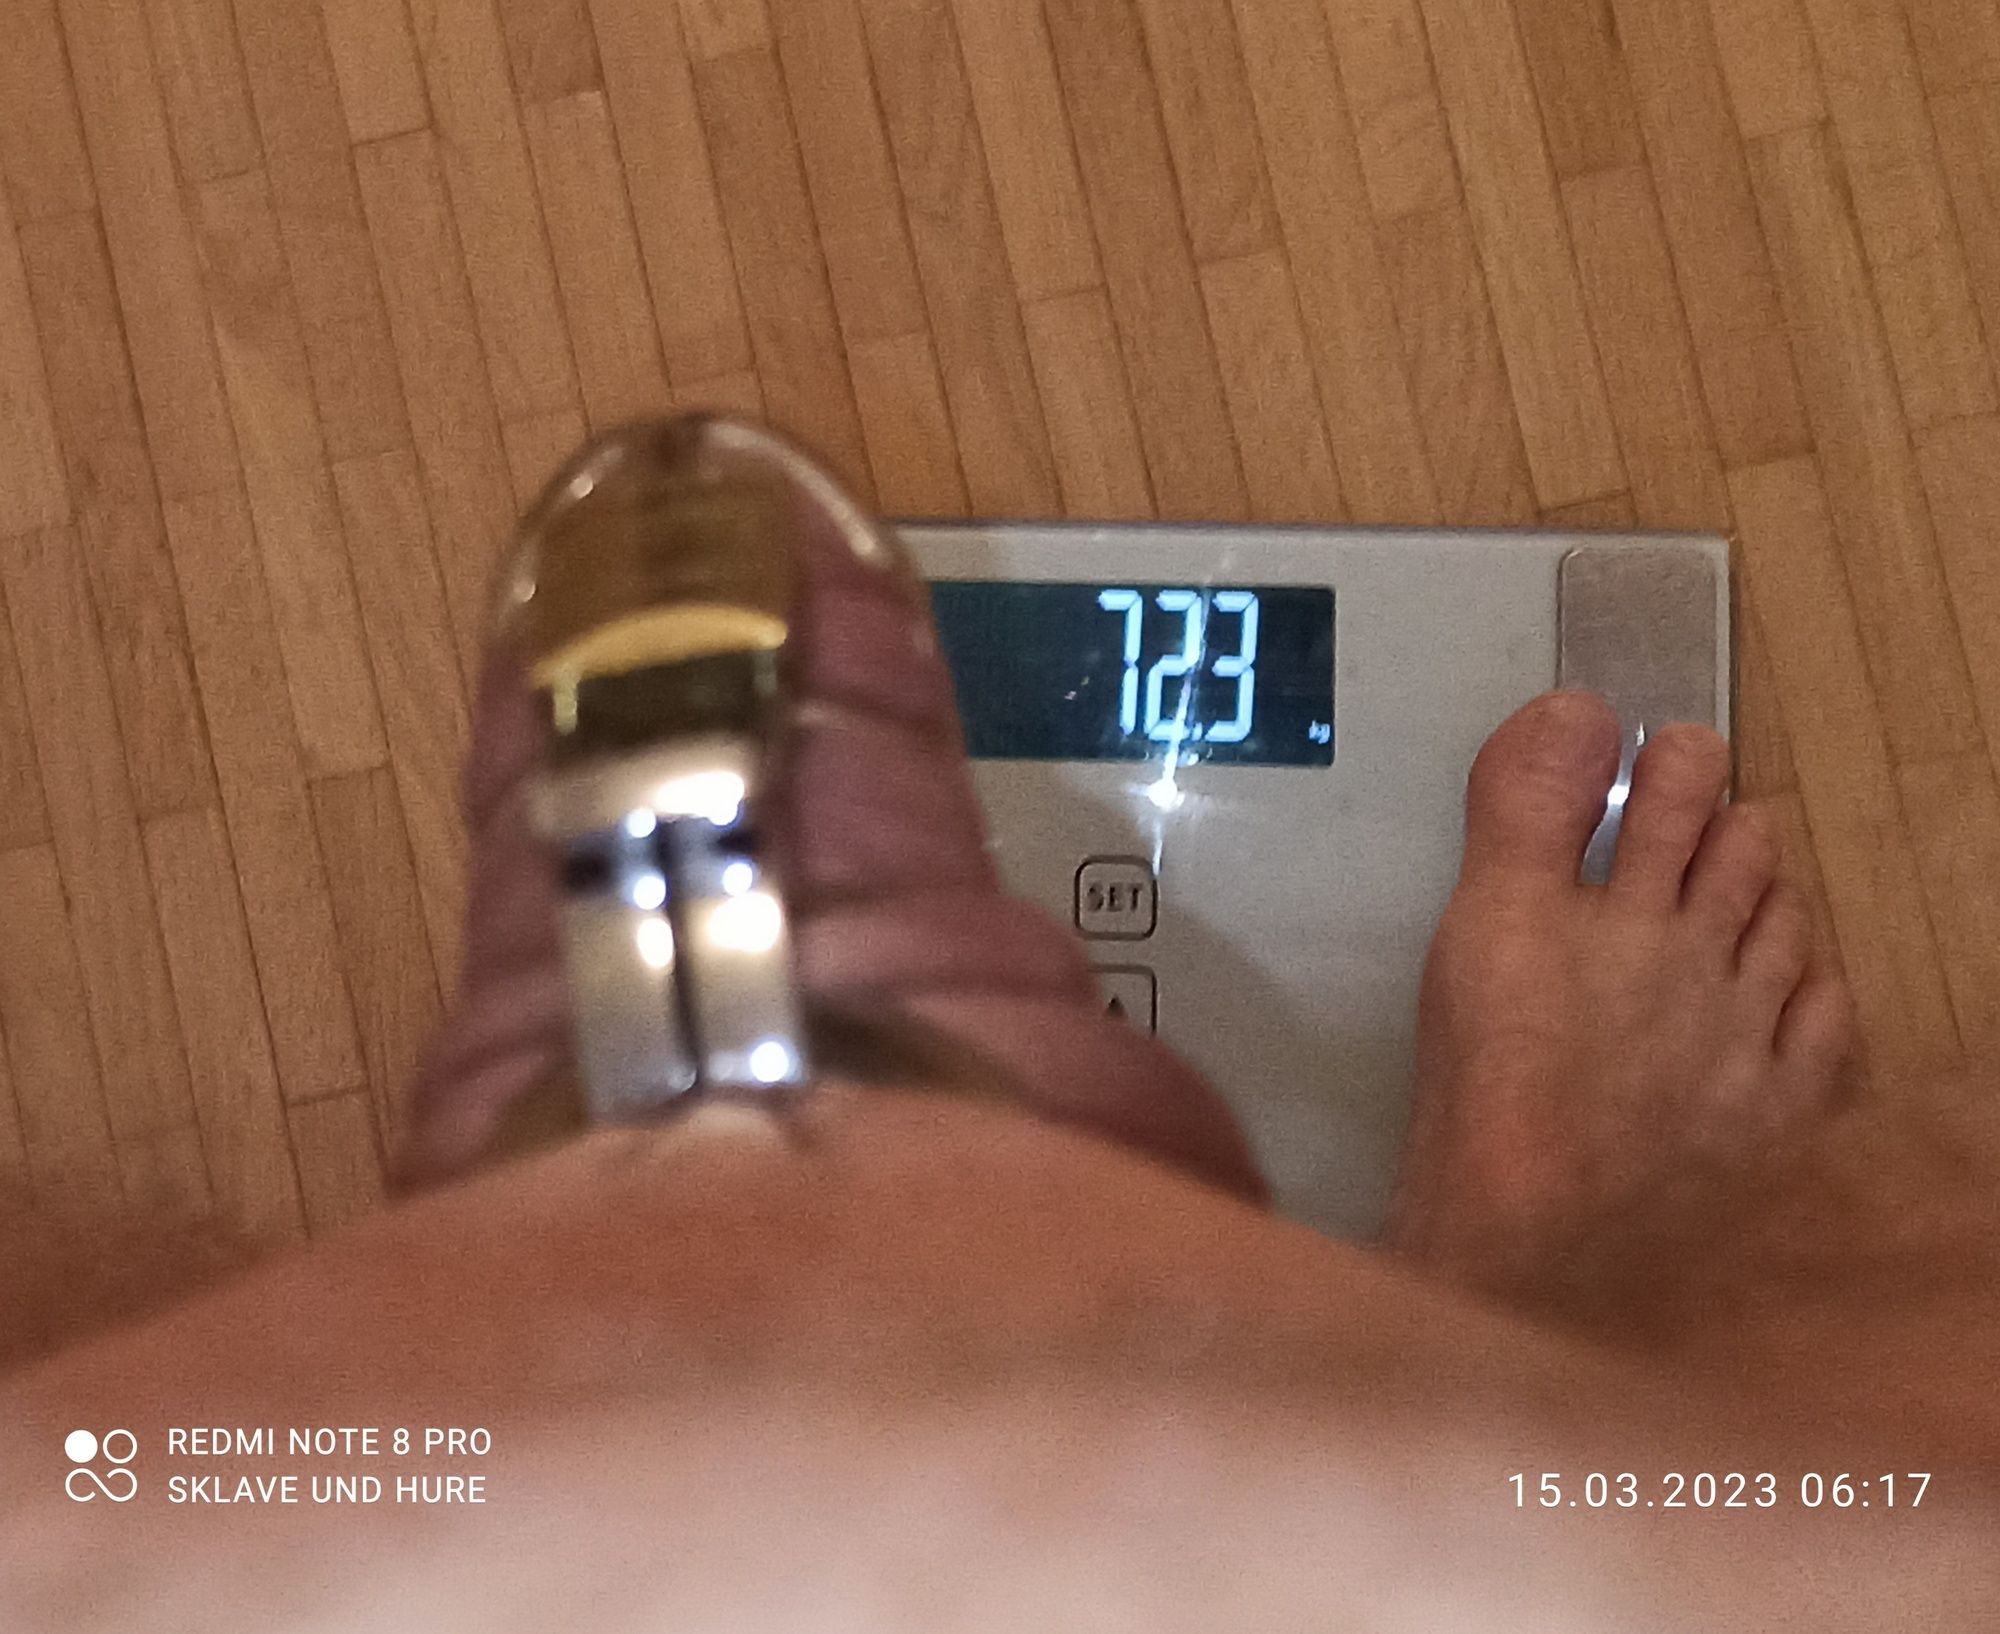 mandatory weighing and cagecheck of 15.03.2023